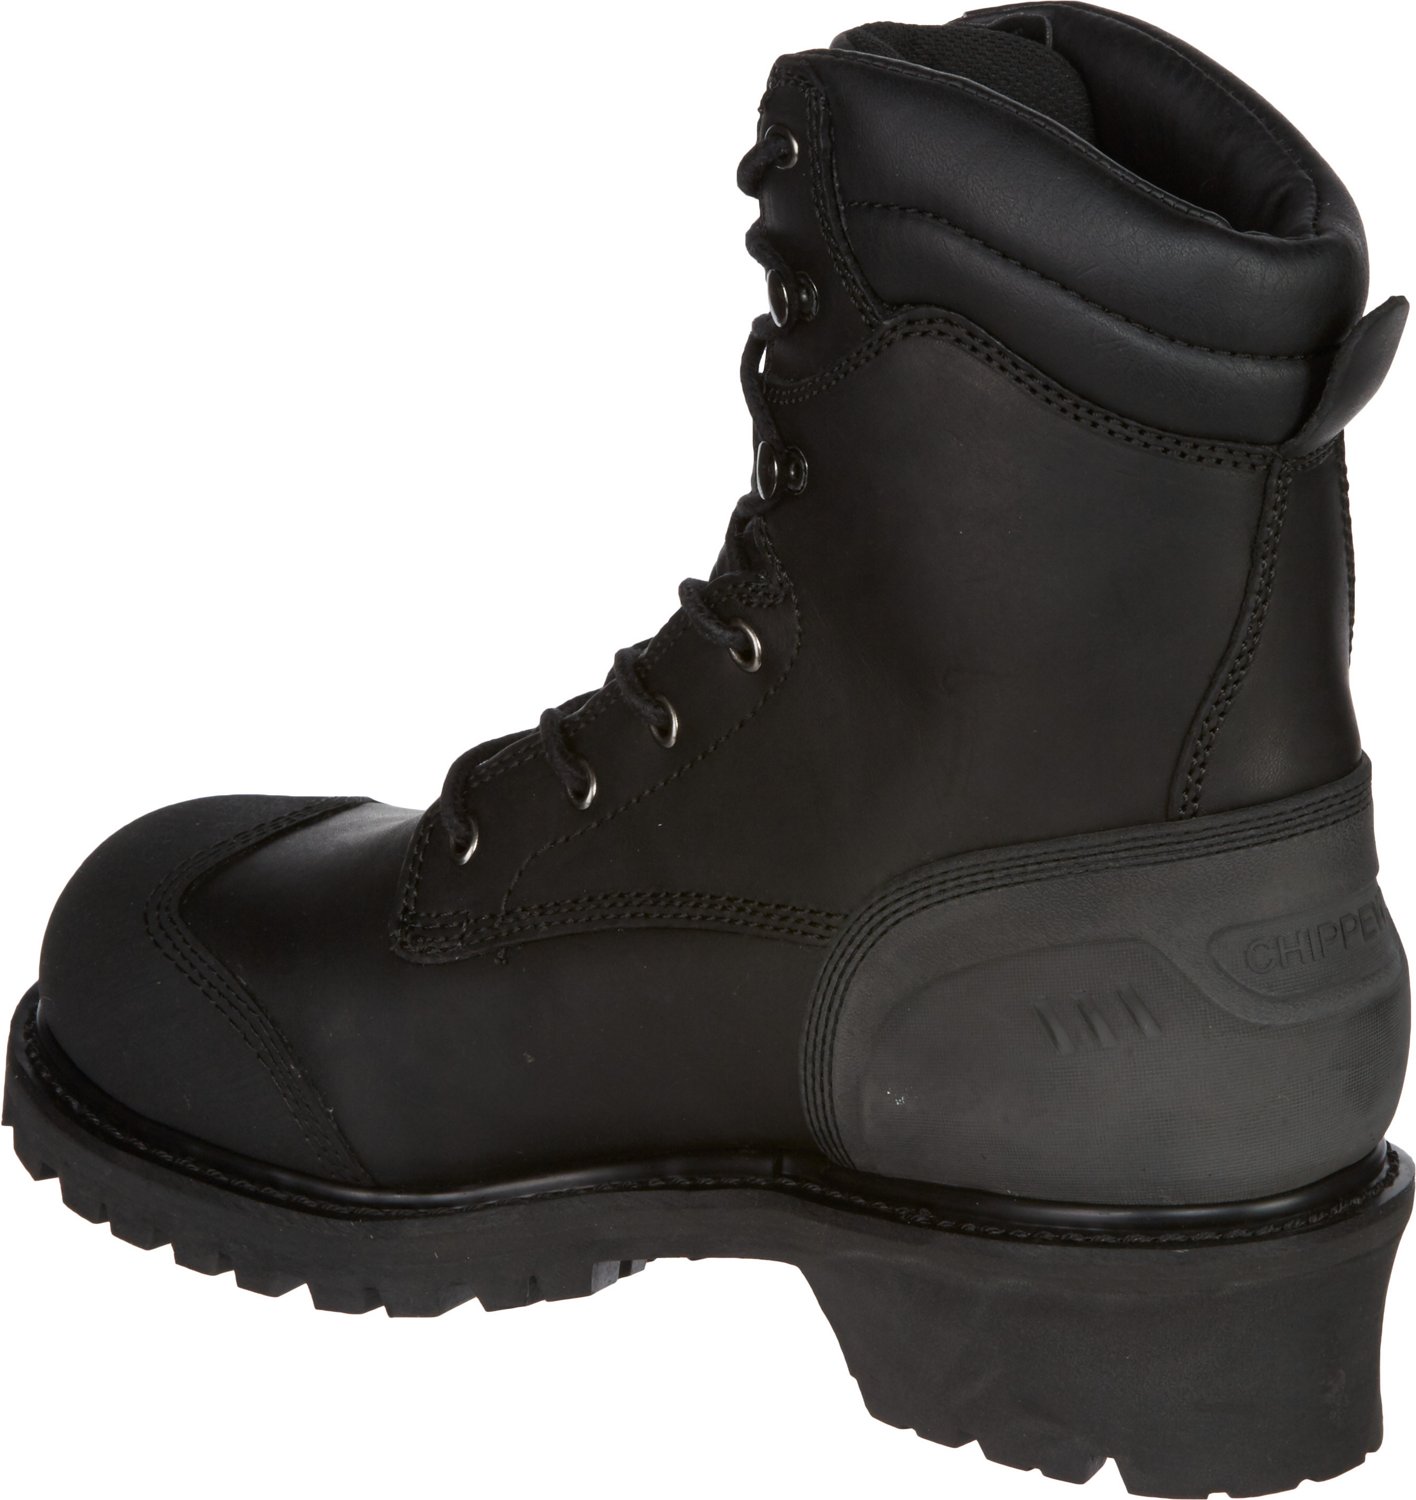 Chippewa Boots Oiled Insulated EH Steel Toe Lace Up Work Boots | Academy